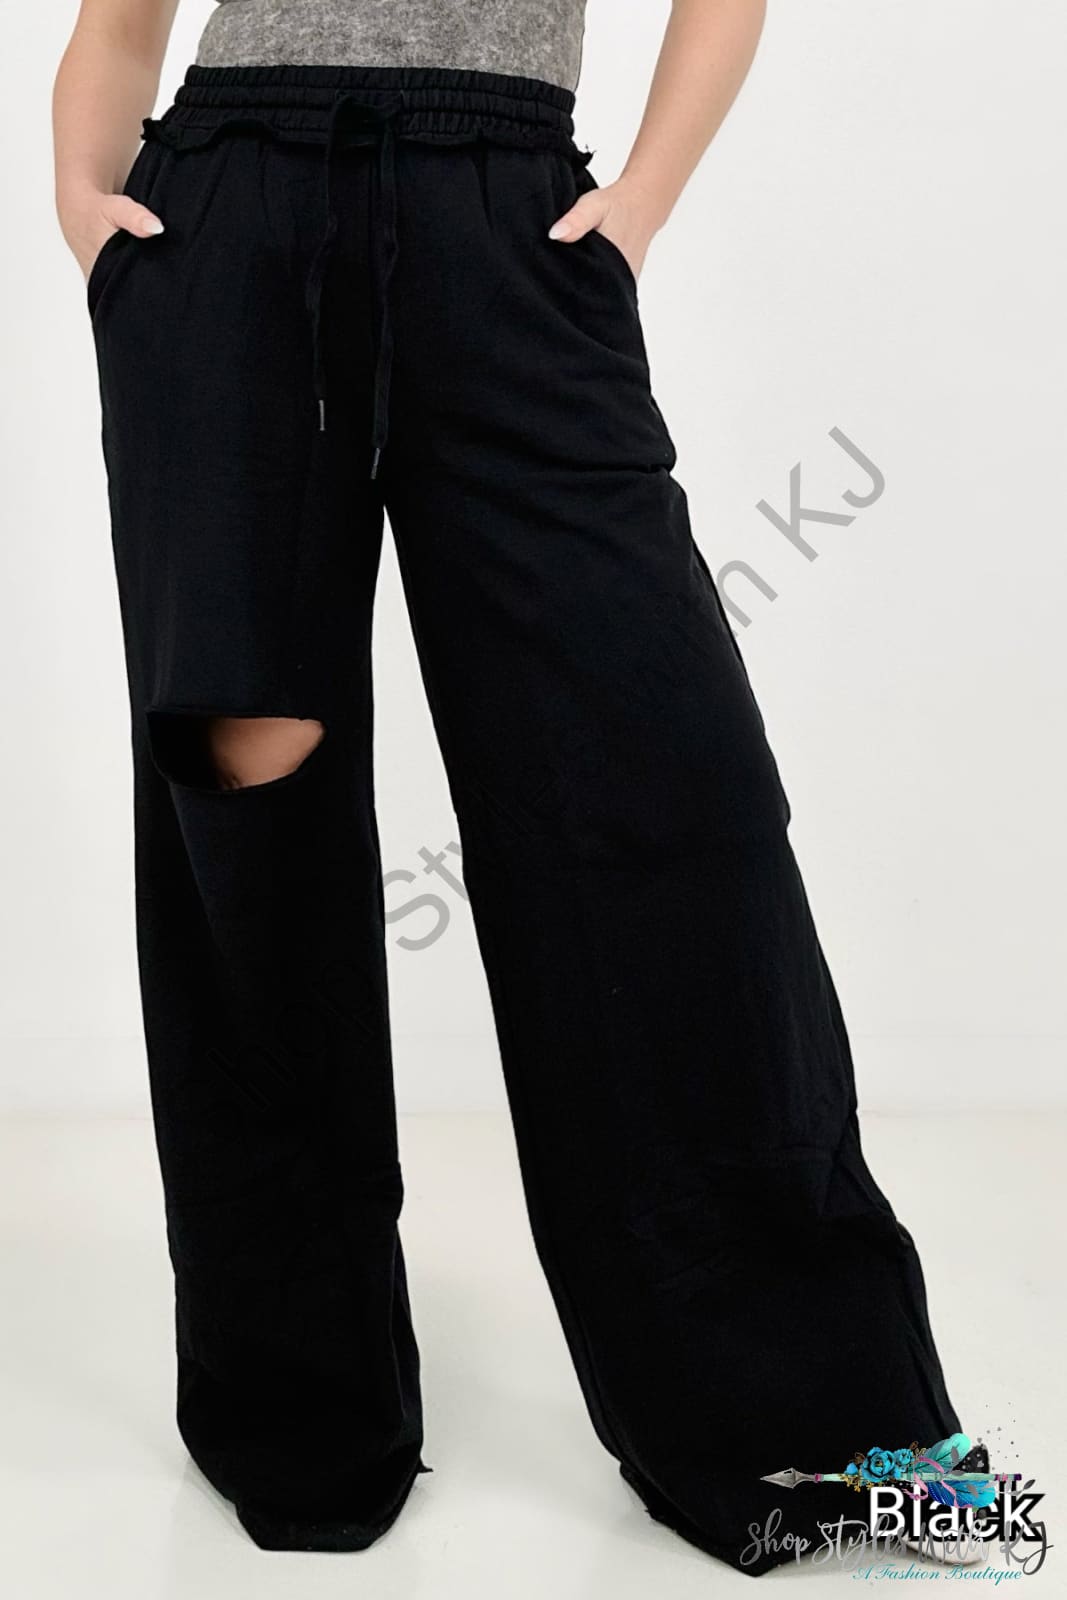 Distressed Knee French Terry Sweats With Pockets Black / S Pants